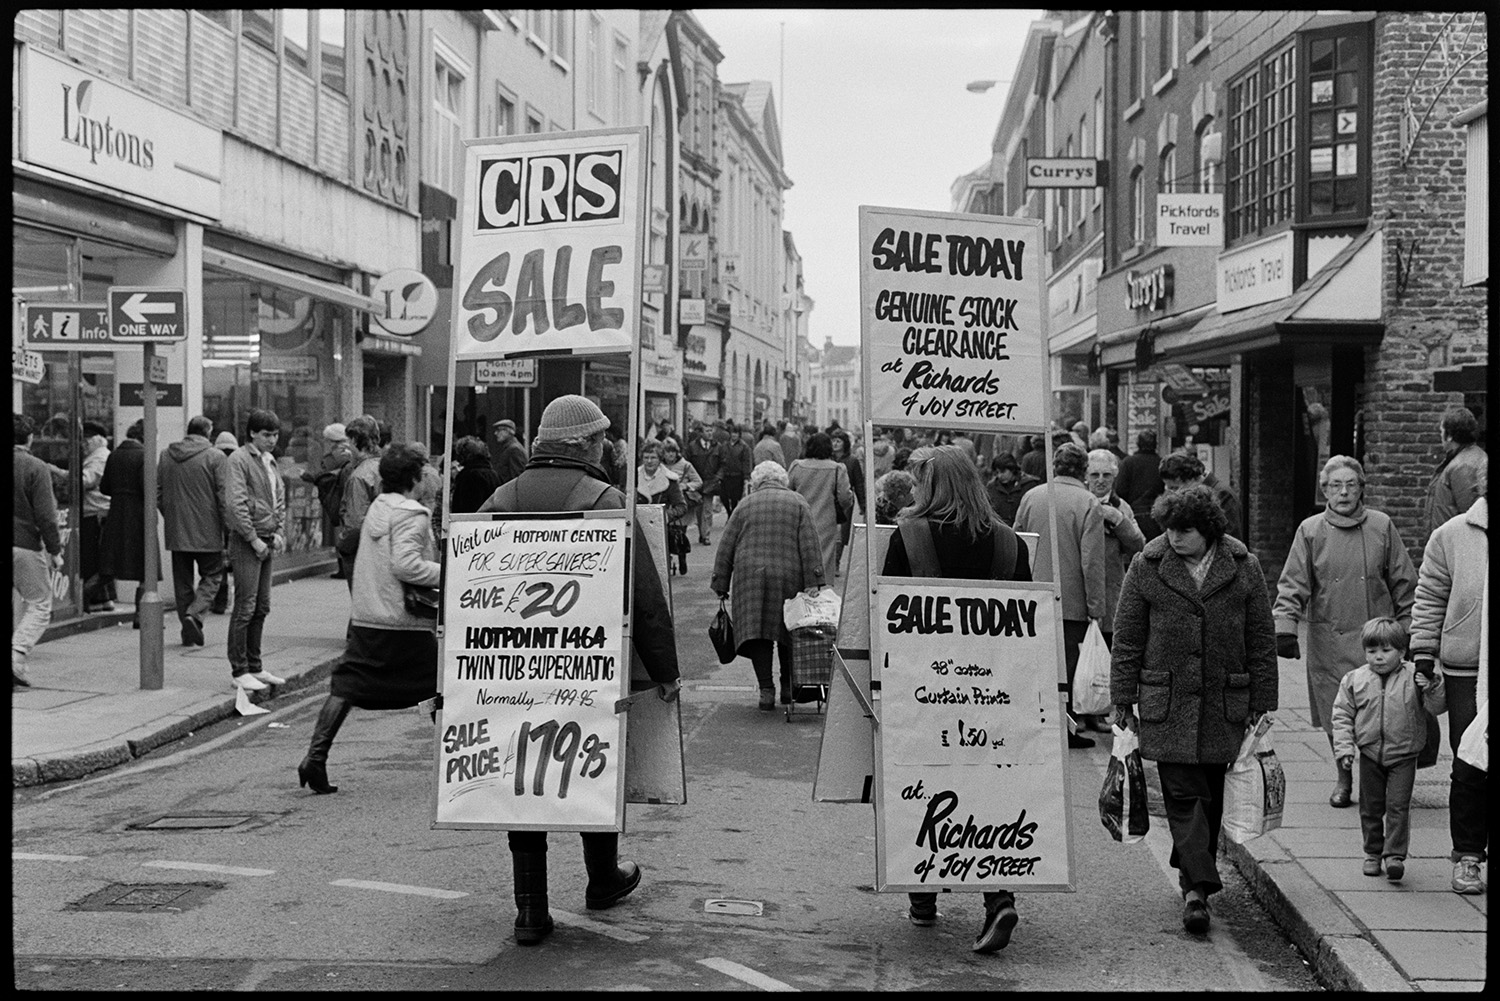 Sandwich persons advertising sales in High street. Sandwich boards.
[Two people walking down the High Street in Barnstaple carrying sandwich boards that advertise sales at Richards and CRS shops. The street is crowded with shoppers, with shops in the background including Liptons, Pickford's Travel and Currys.]